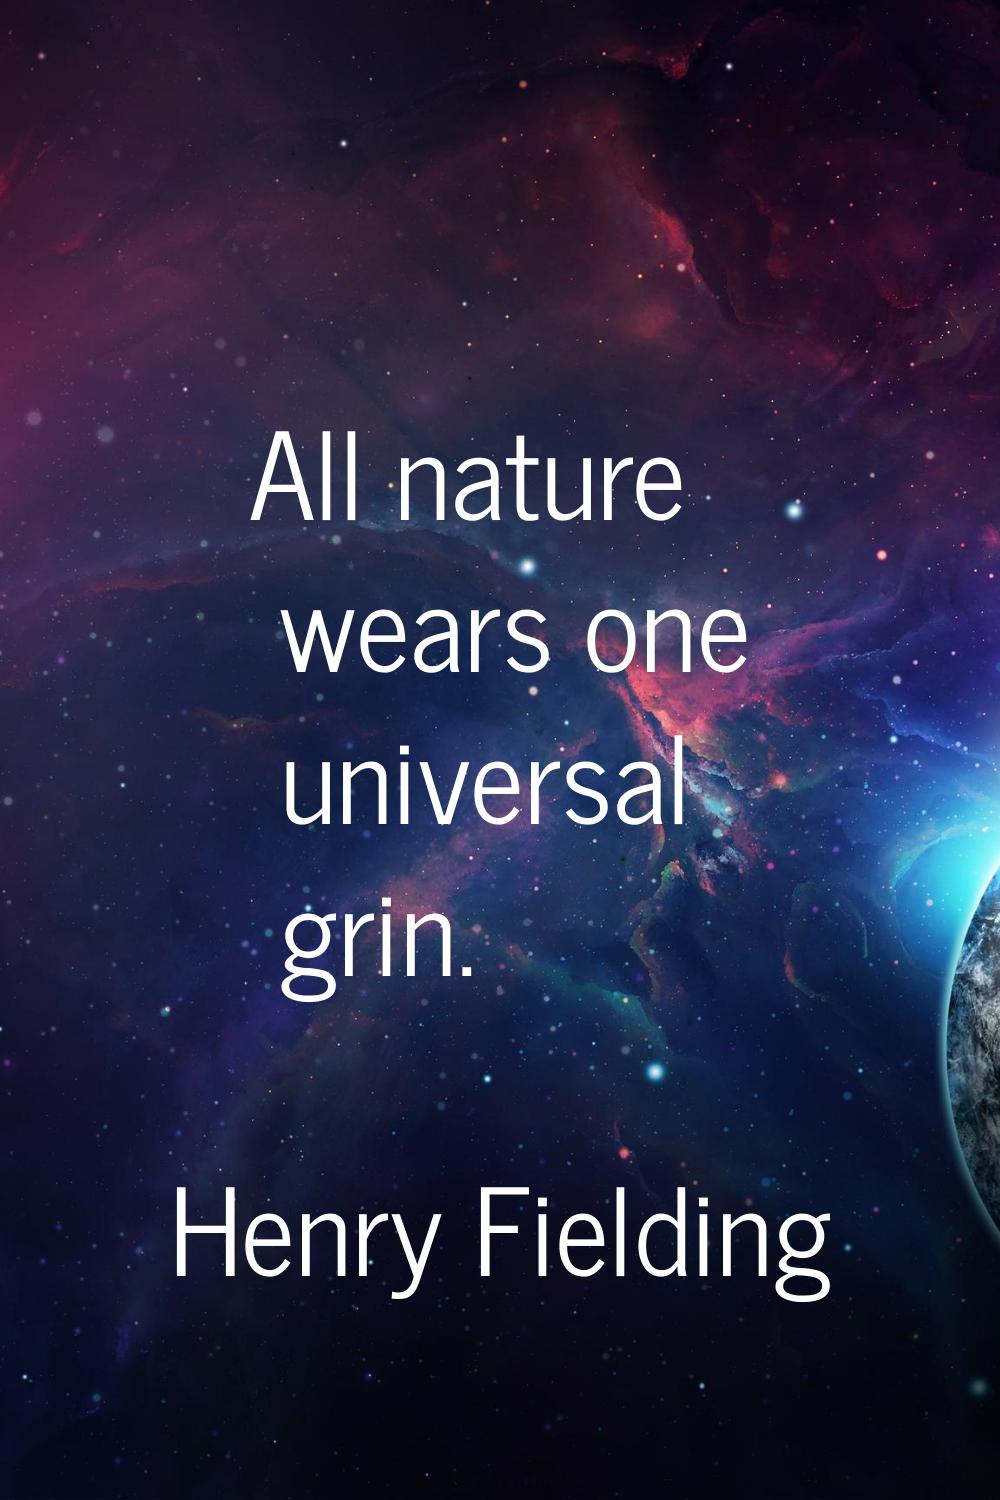 All nature wears one universal grin.